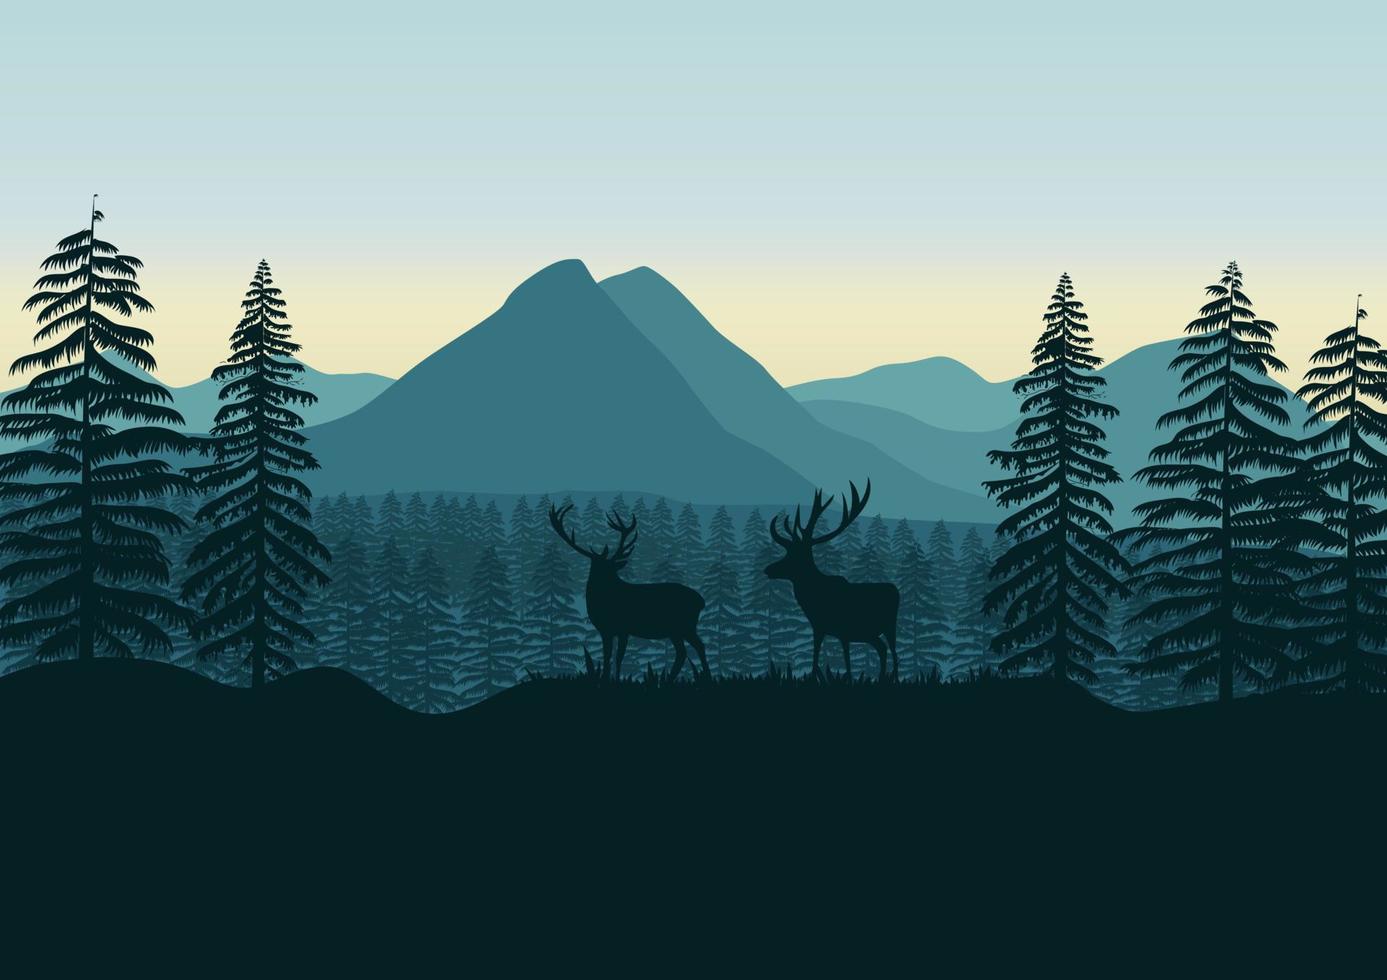 Mountain landscape with moose in the pine forest. Vector illustration.